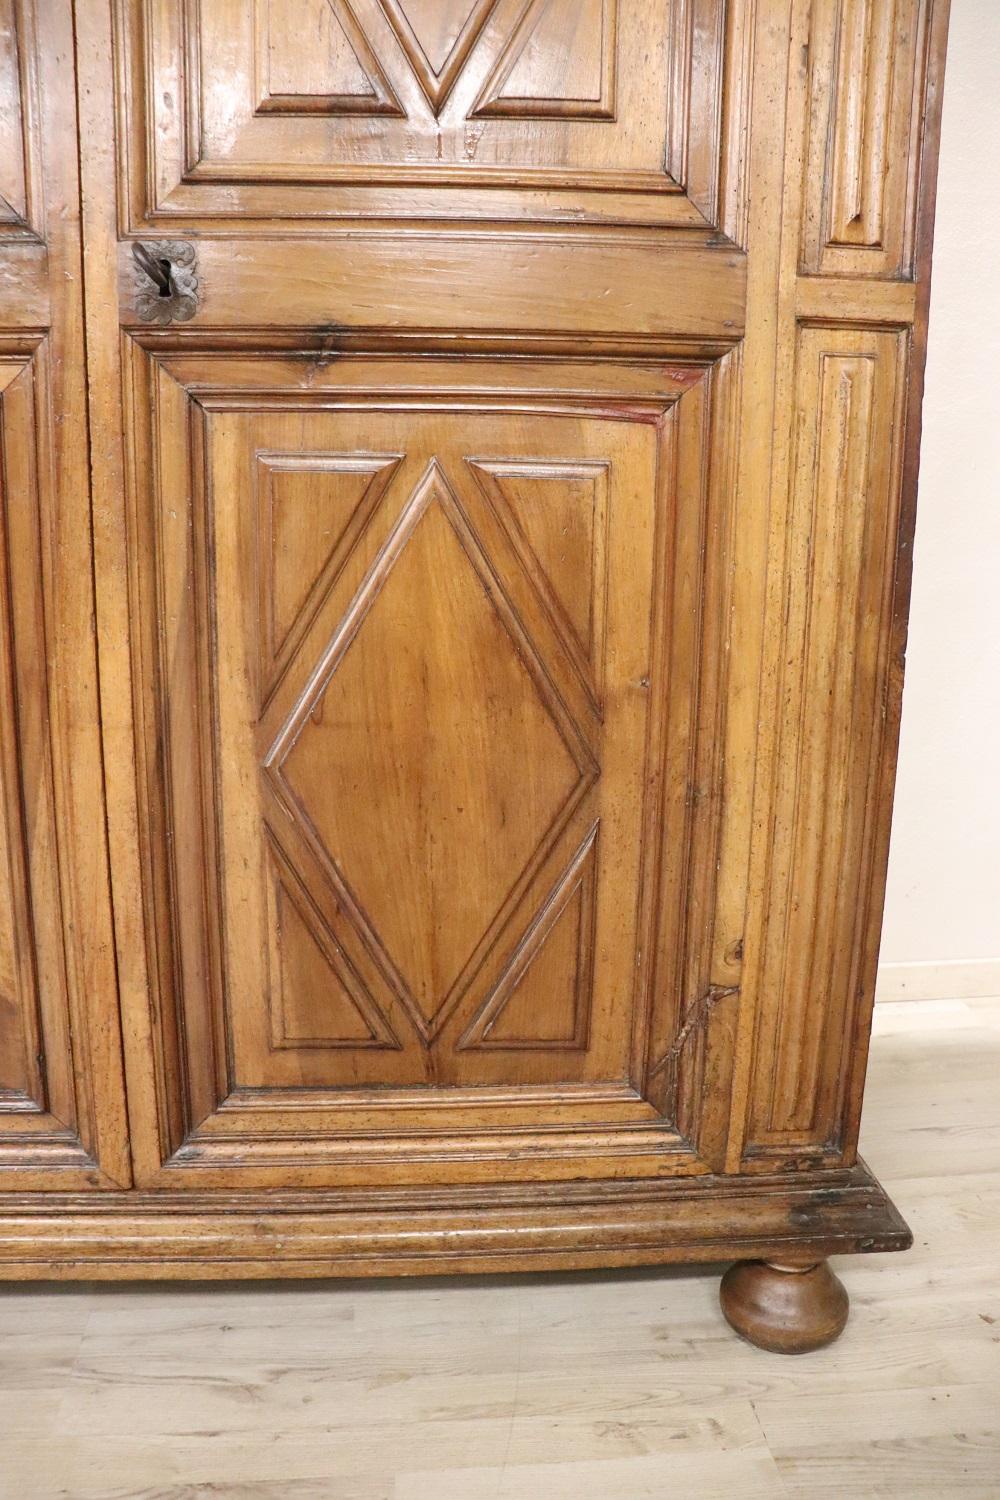 Late 17th Century Louis XIV Solid Walnut Antique Wardrobe or Armoire with Secret For Sale 5